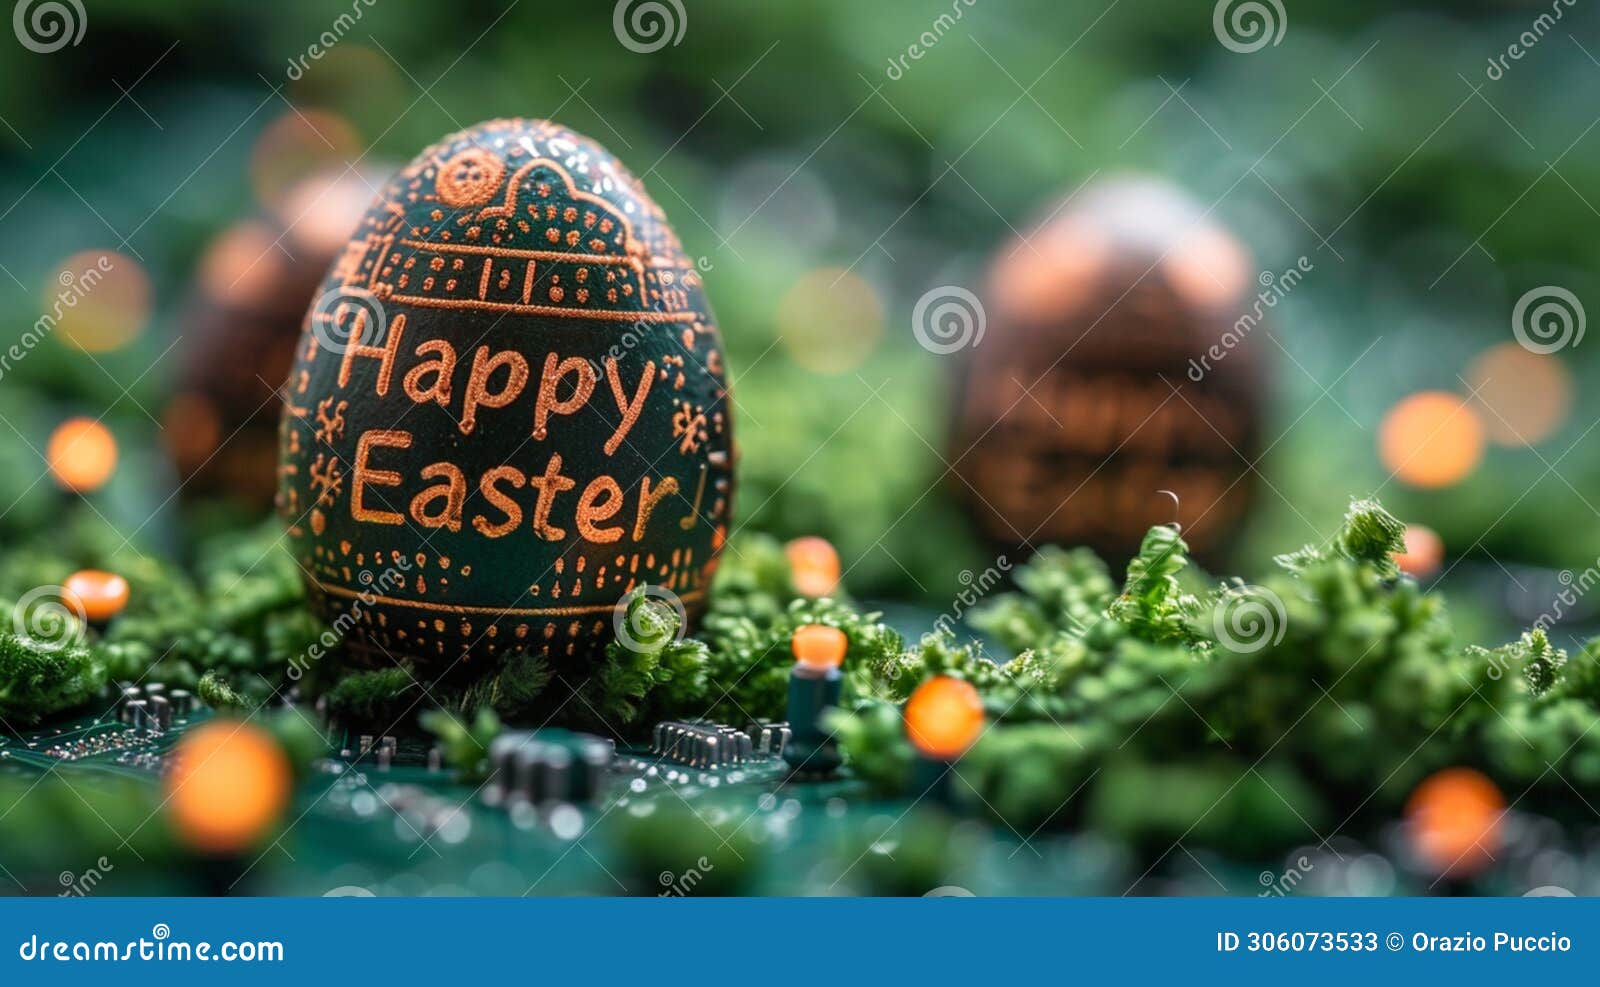 technological easter: easter eggs with easter greetings and printed circuit boards,  of progress and technological future